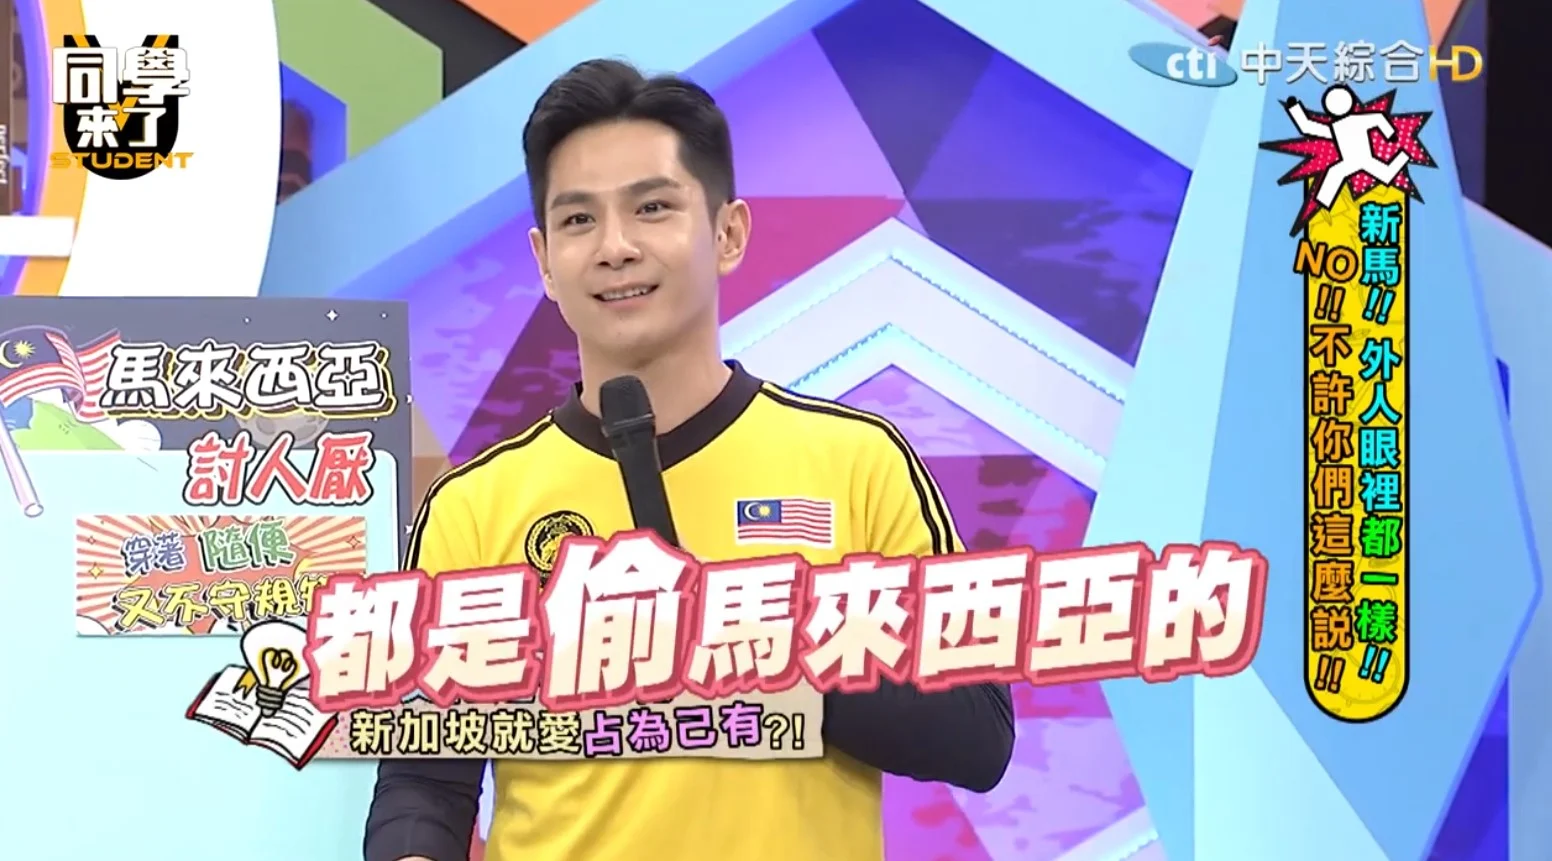 M'sian contestant zu xiong claims popular m'sian dishes were 'stolen' by s'pore